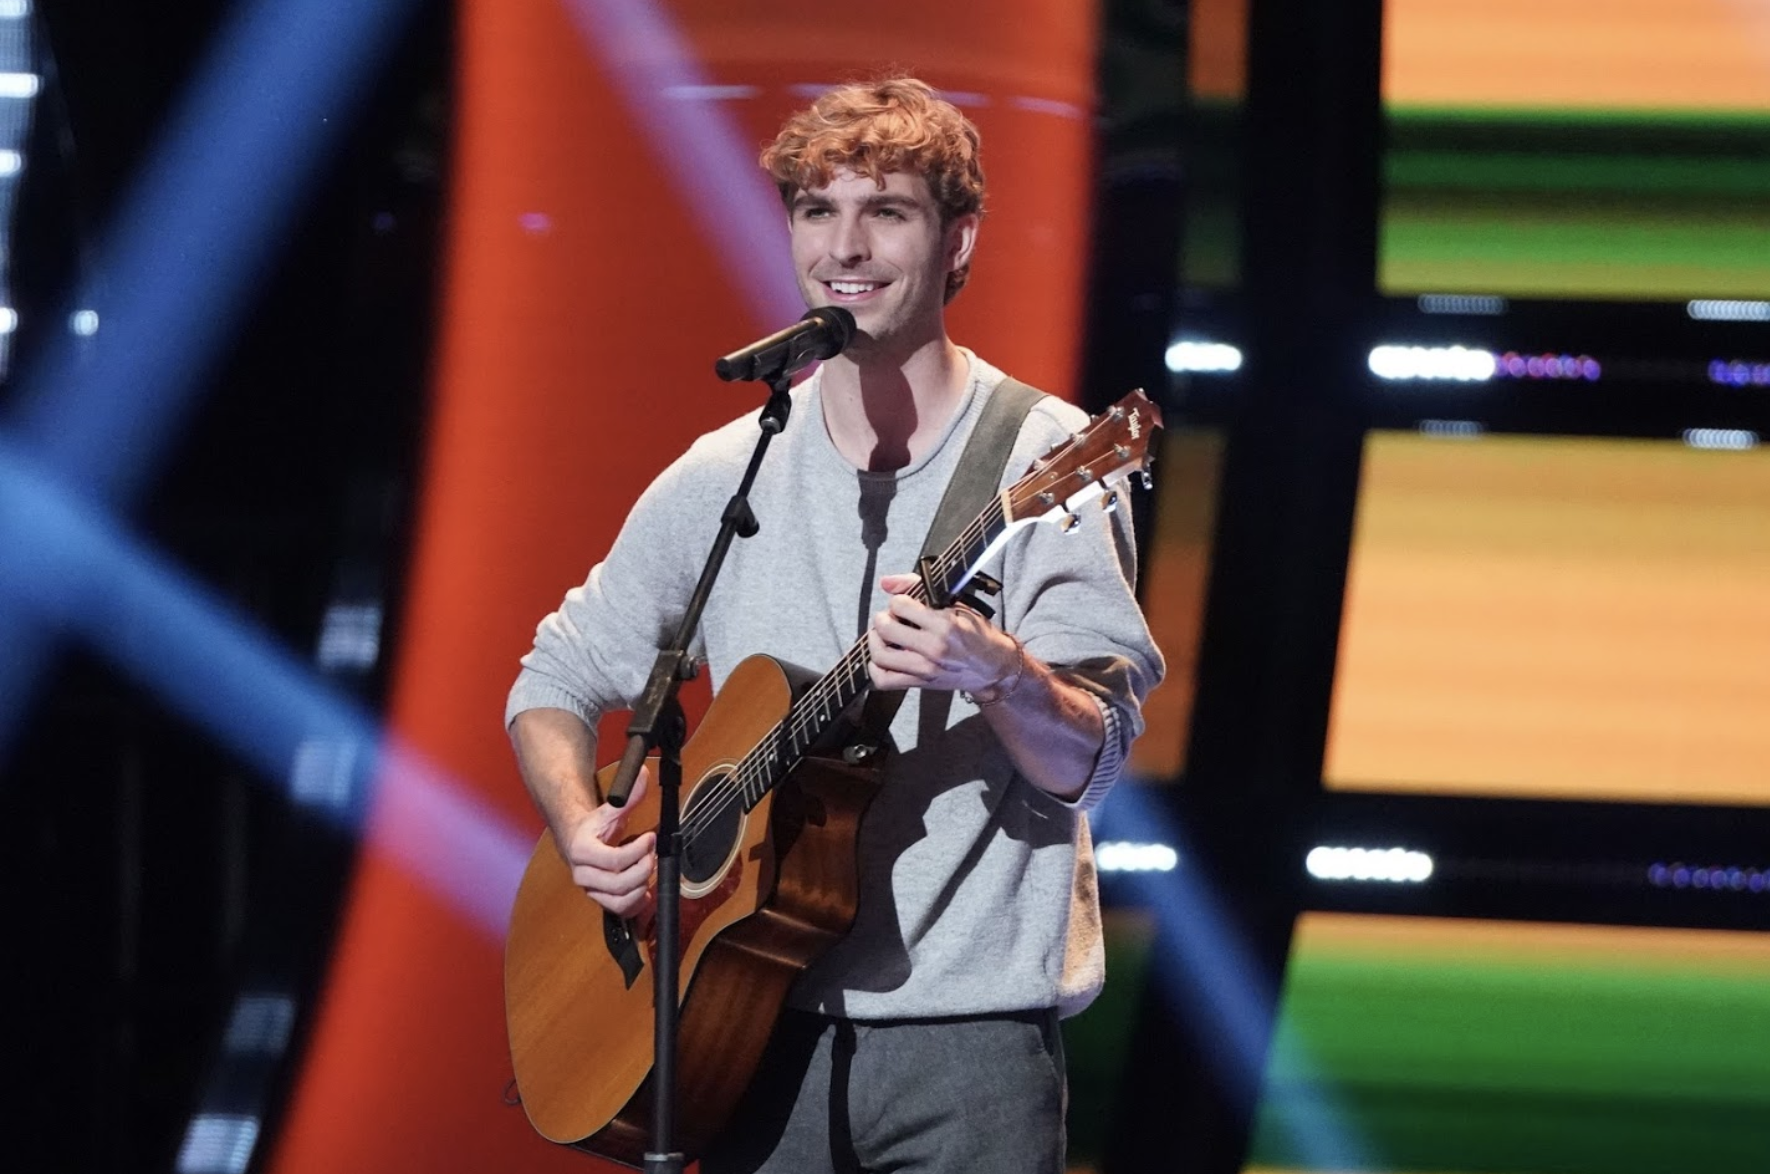 "The Voice" contestant and Lincoln native Sam Stacy is just one of many exciting events happening this week.